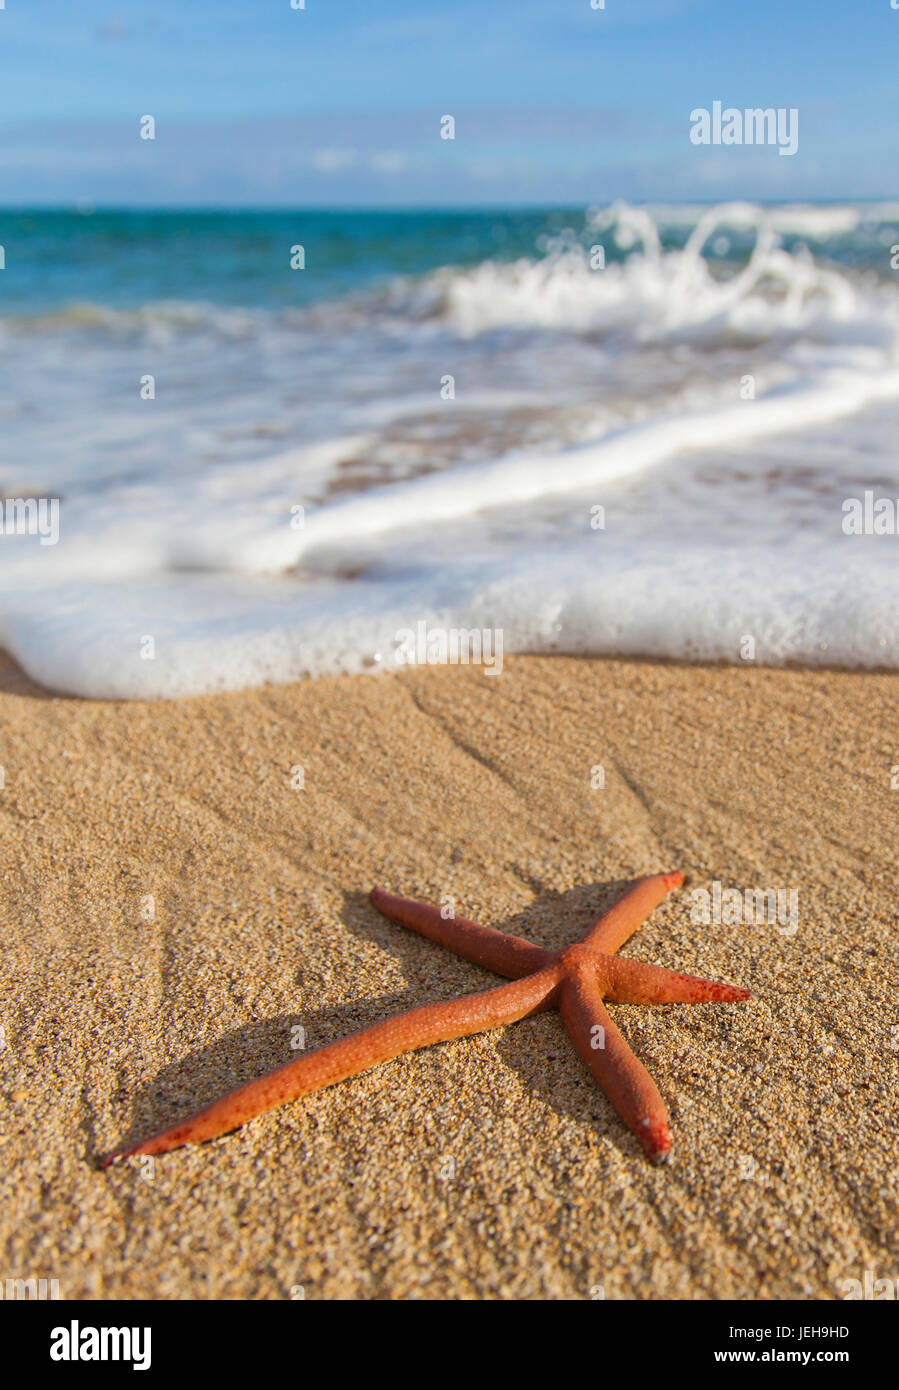 A red live Finger Starfish, also known as Linckia Sea Star, found along a sandy beach with white ocean tide washing up Stock Photo